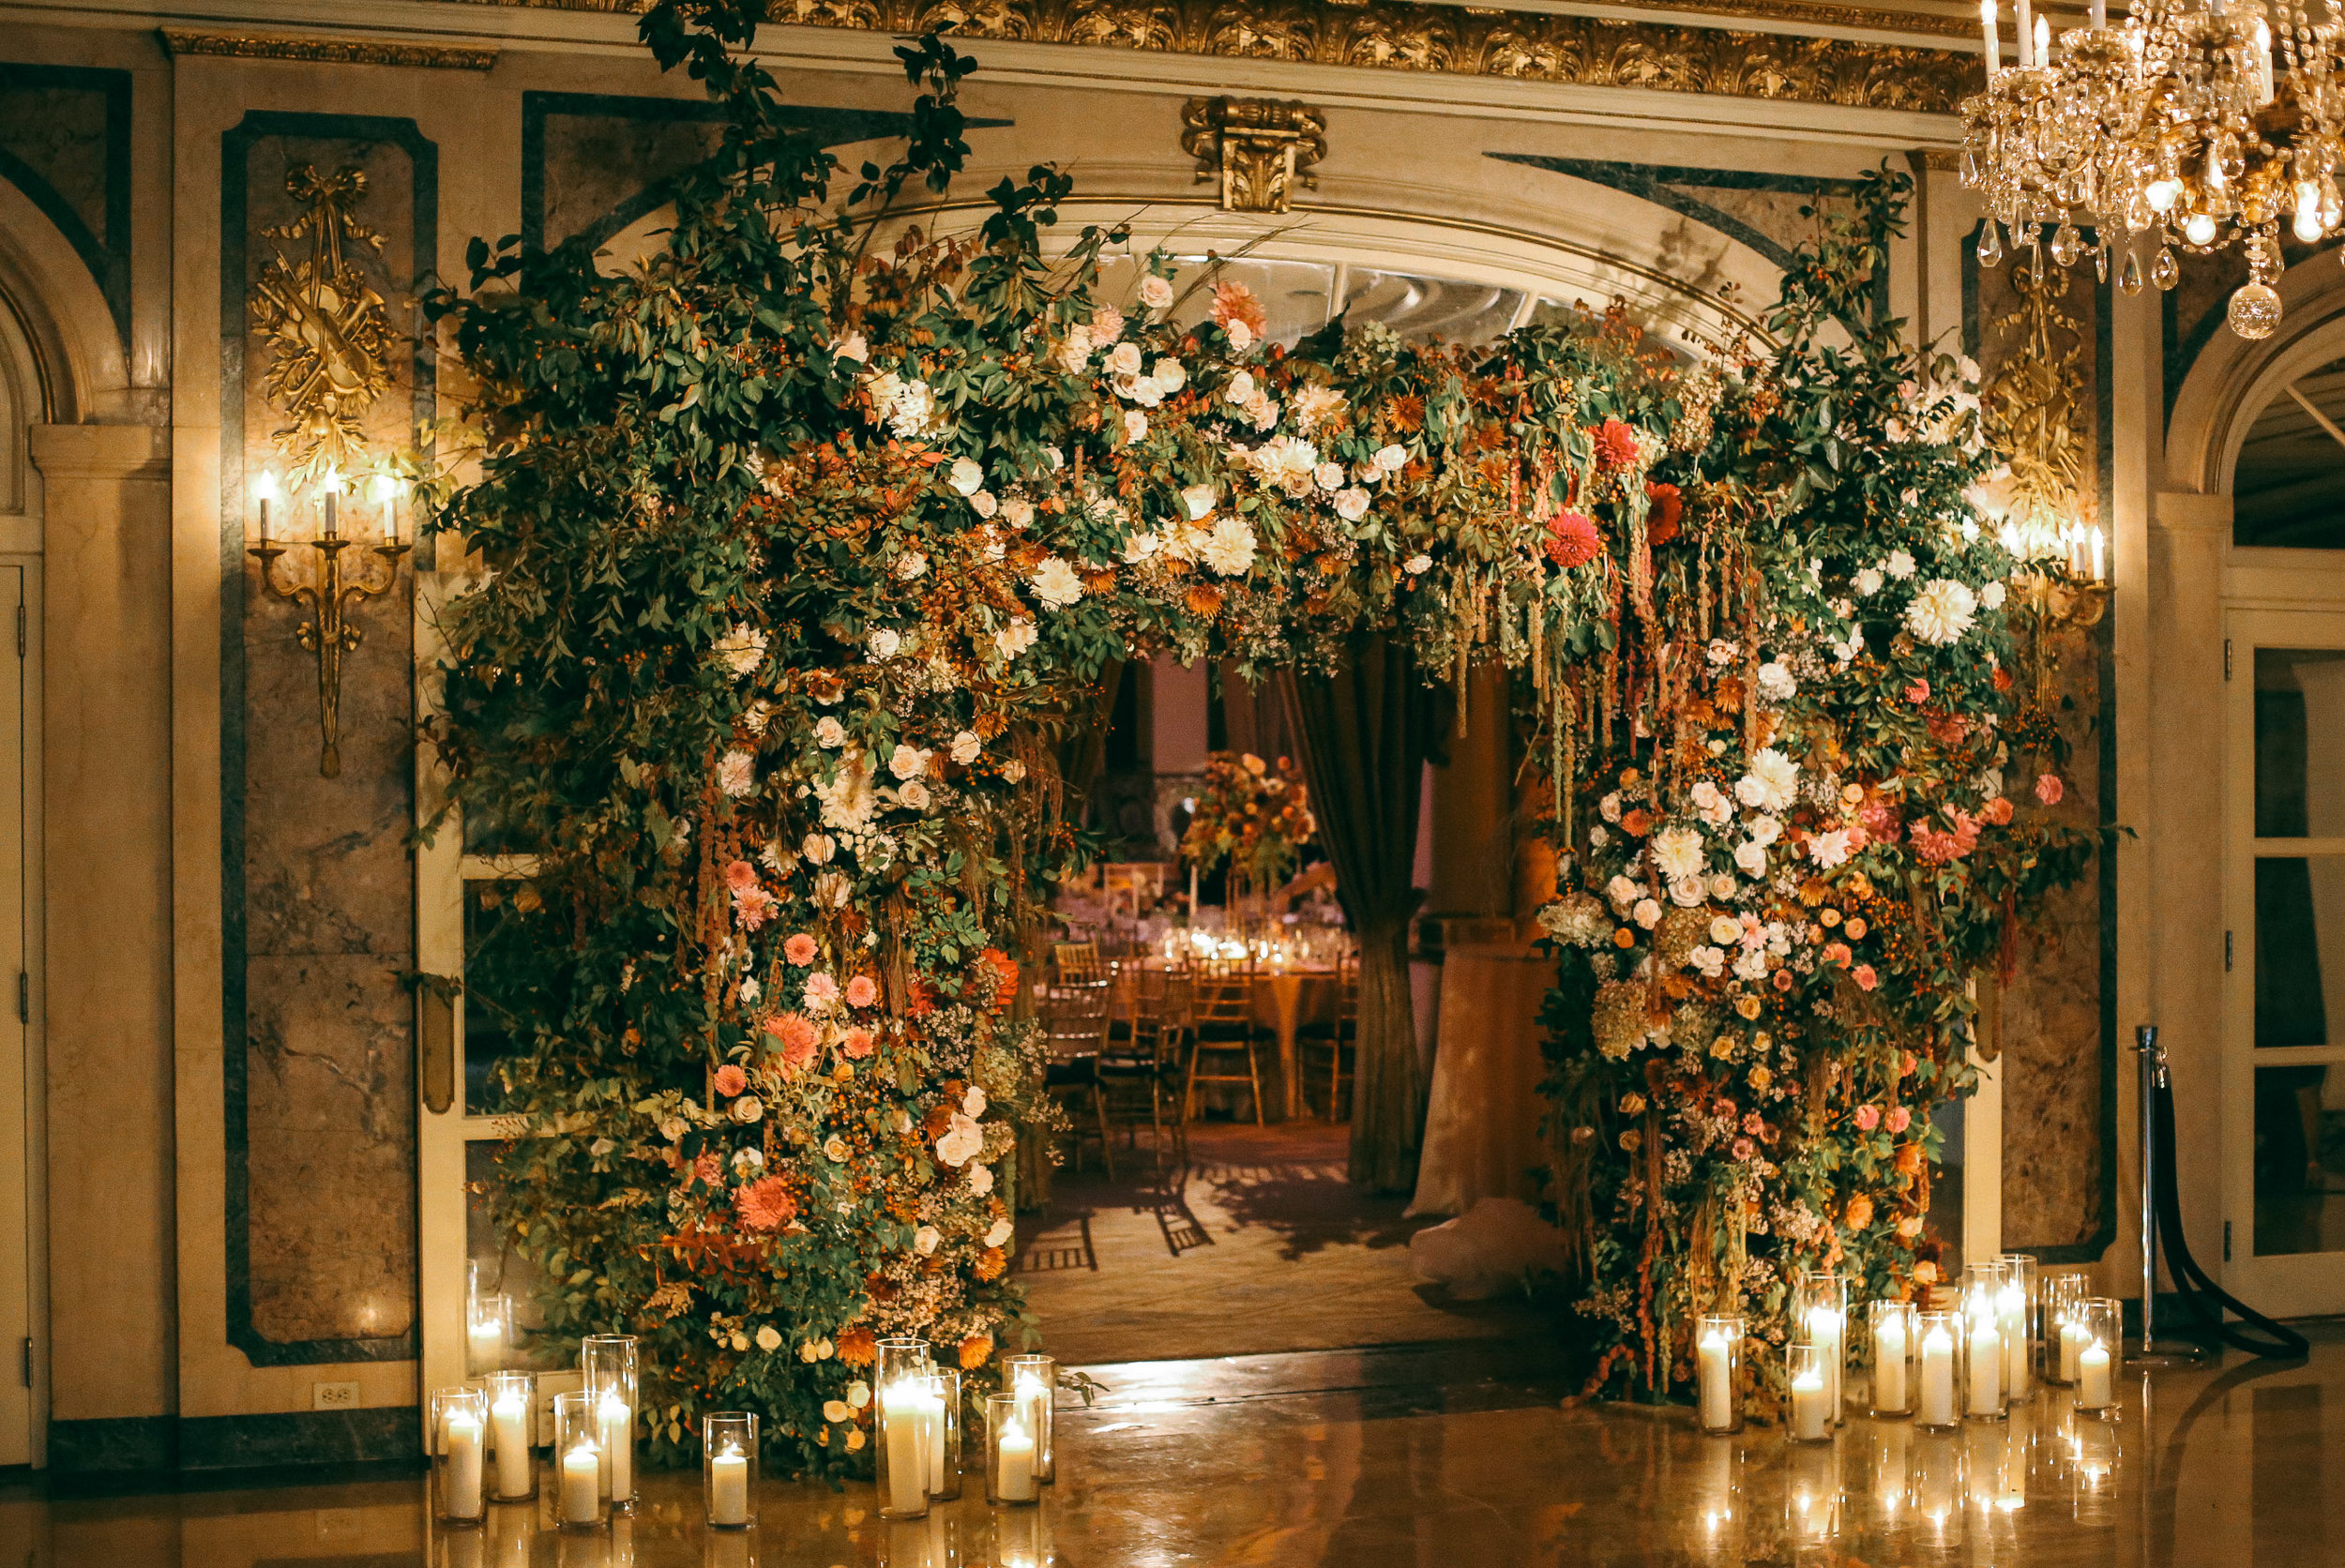 The Plaza wedding floral arch